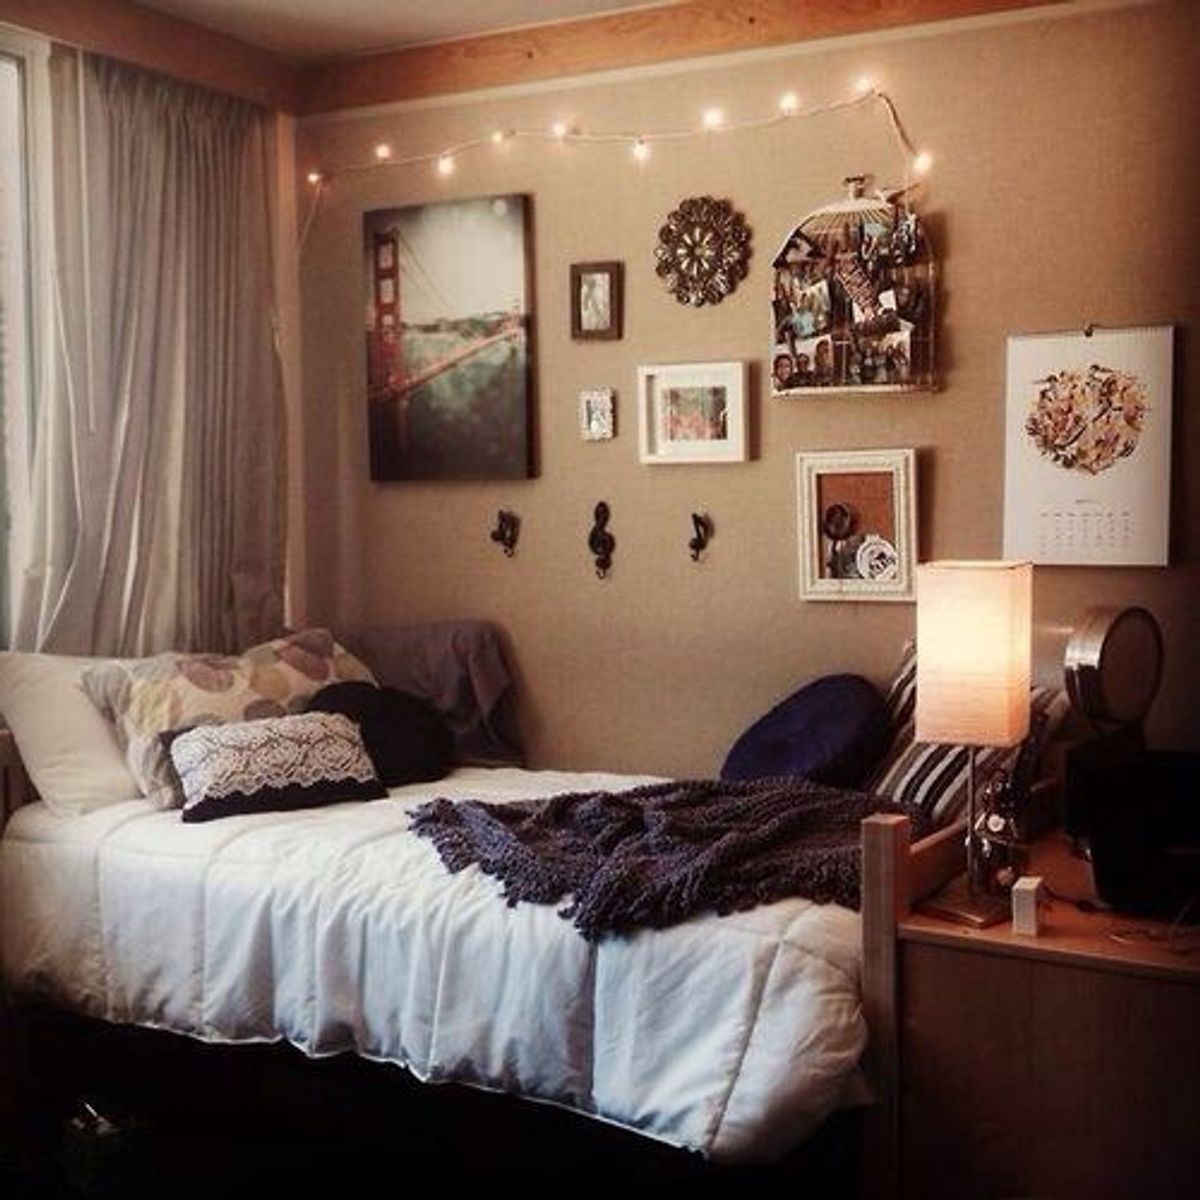 Cheapest, Easiest, Coolest Ways To Decorate Your College Apartment